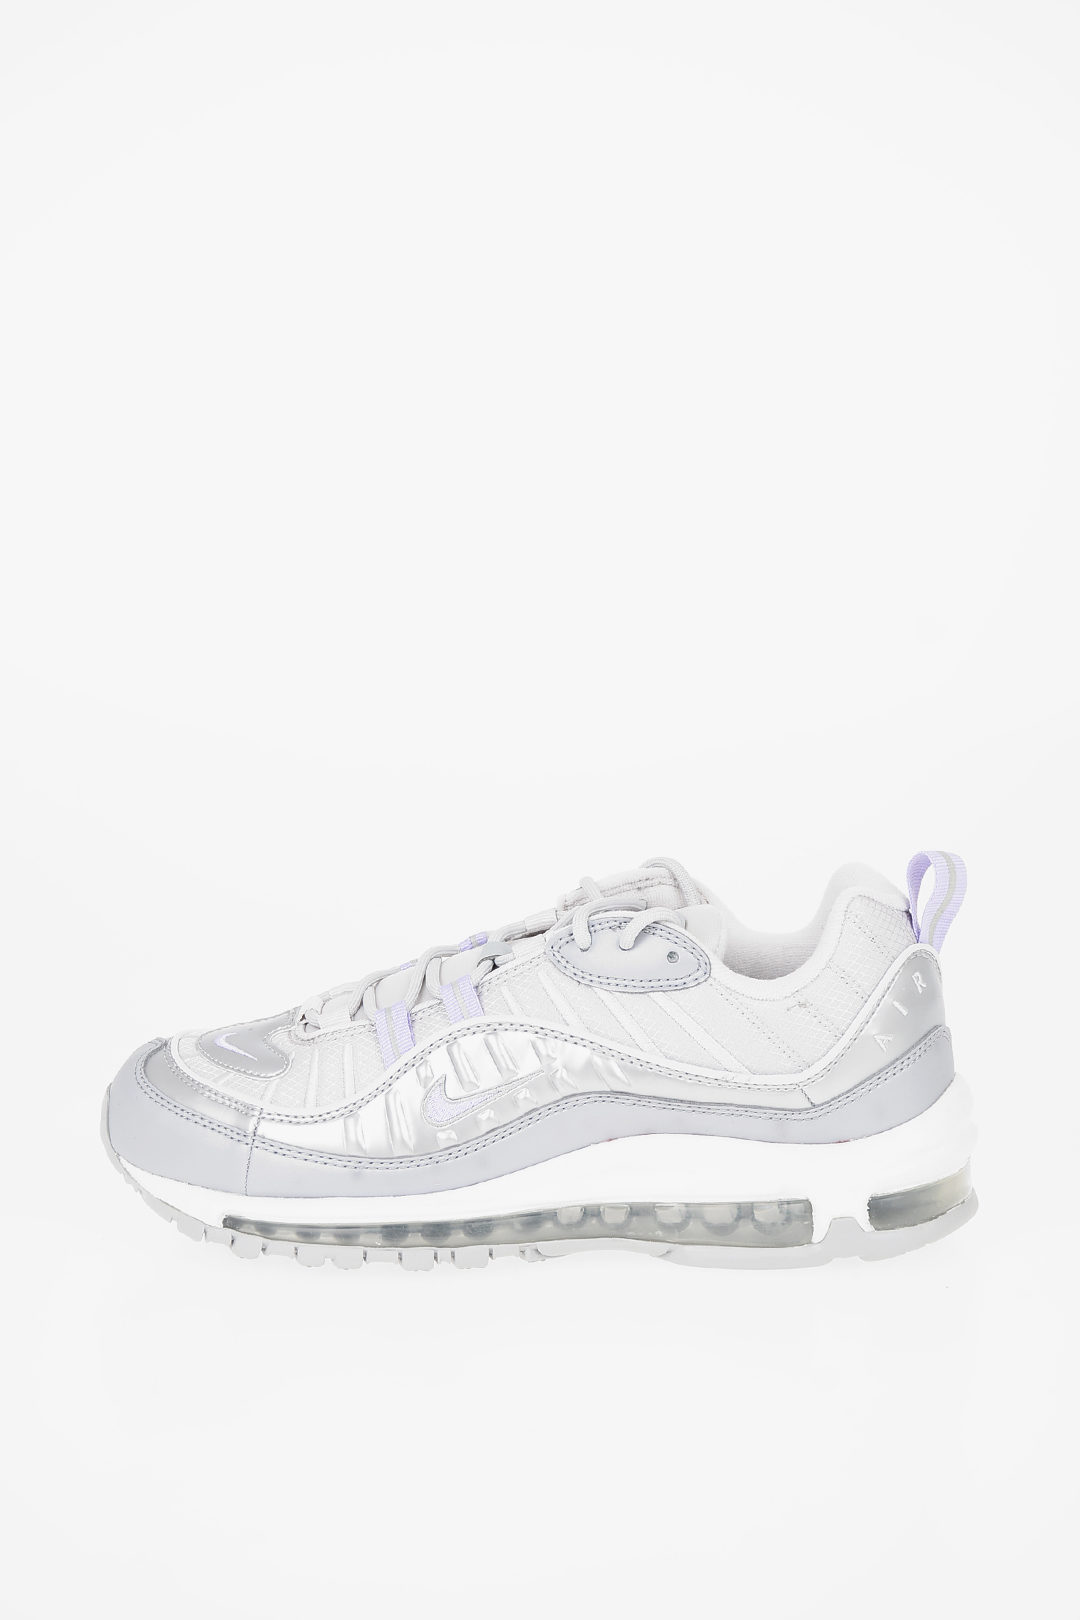 Exquisito tornado Agotar Nike Fabric AIR MAX 98 SE Sneakers women - Glamood Outlet